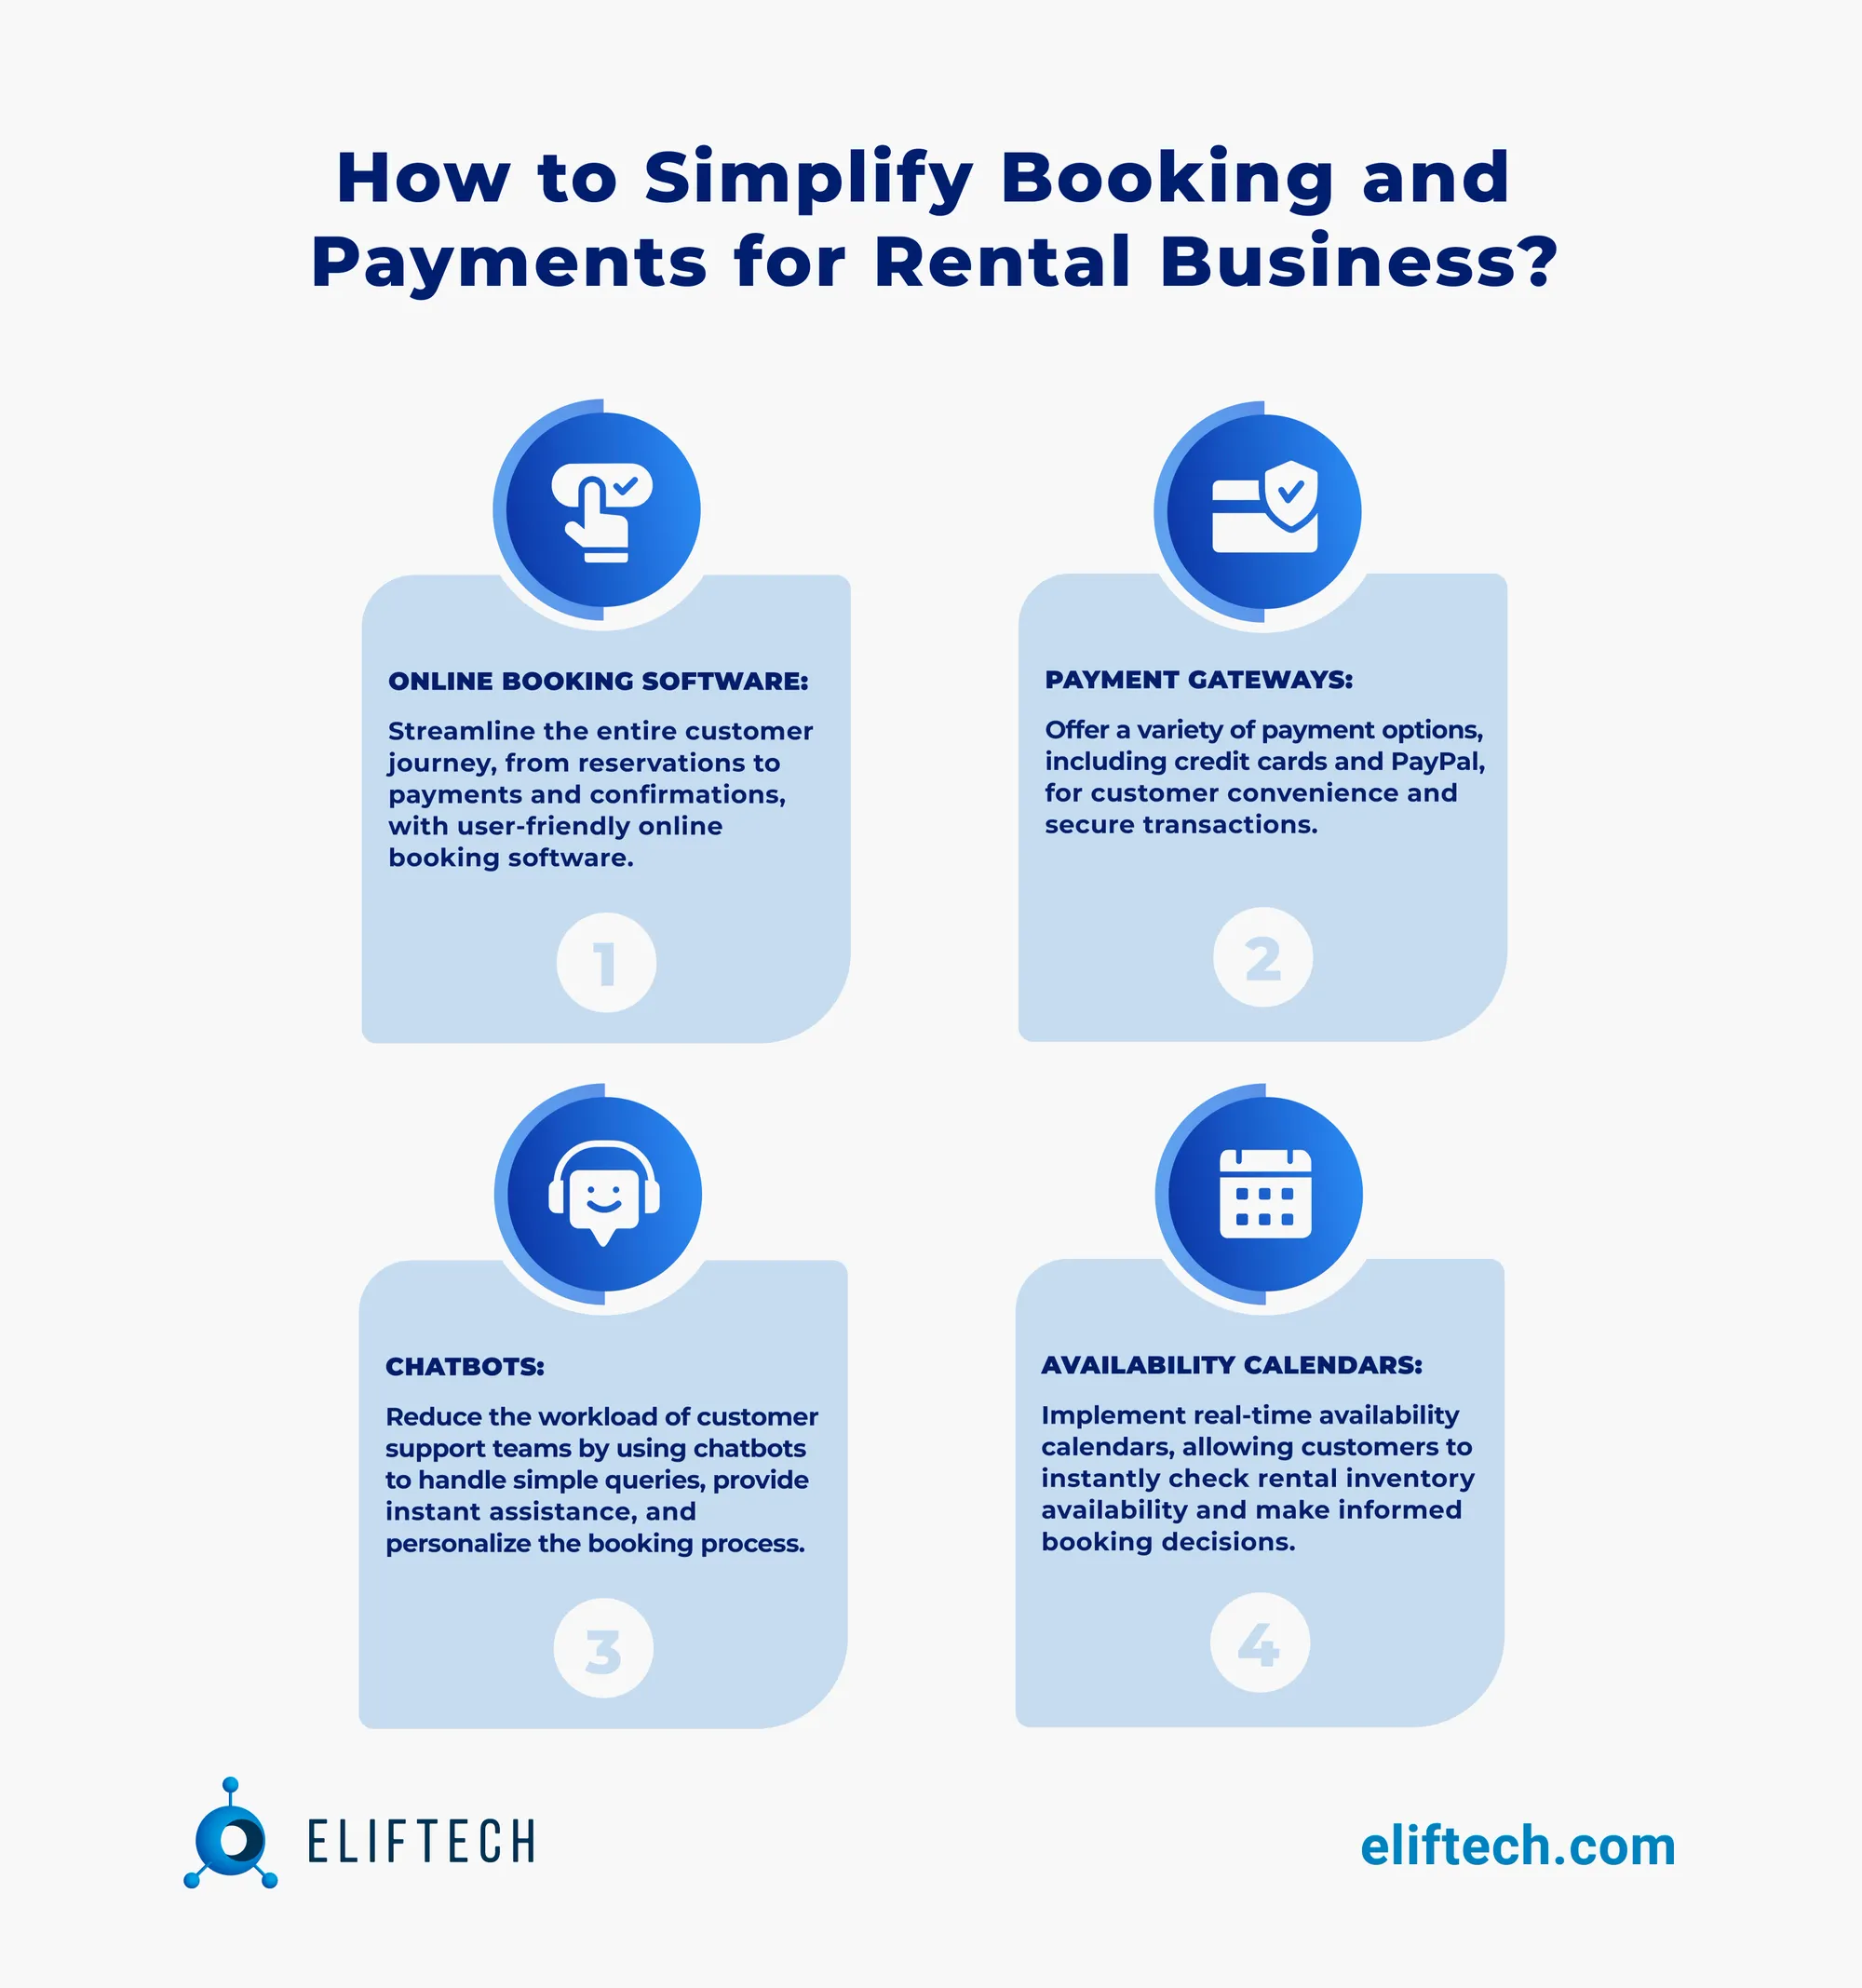 How to Simplify Booking and Payments for Rental Business